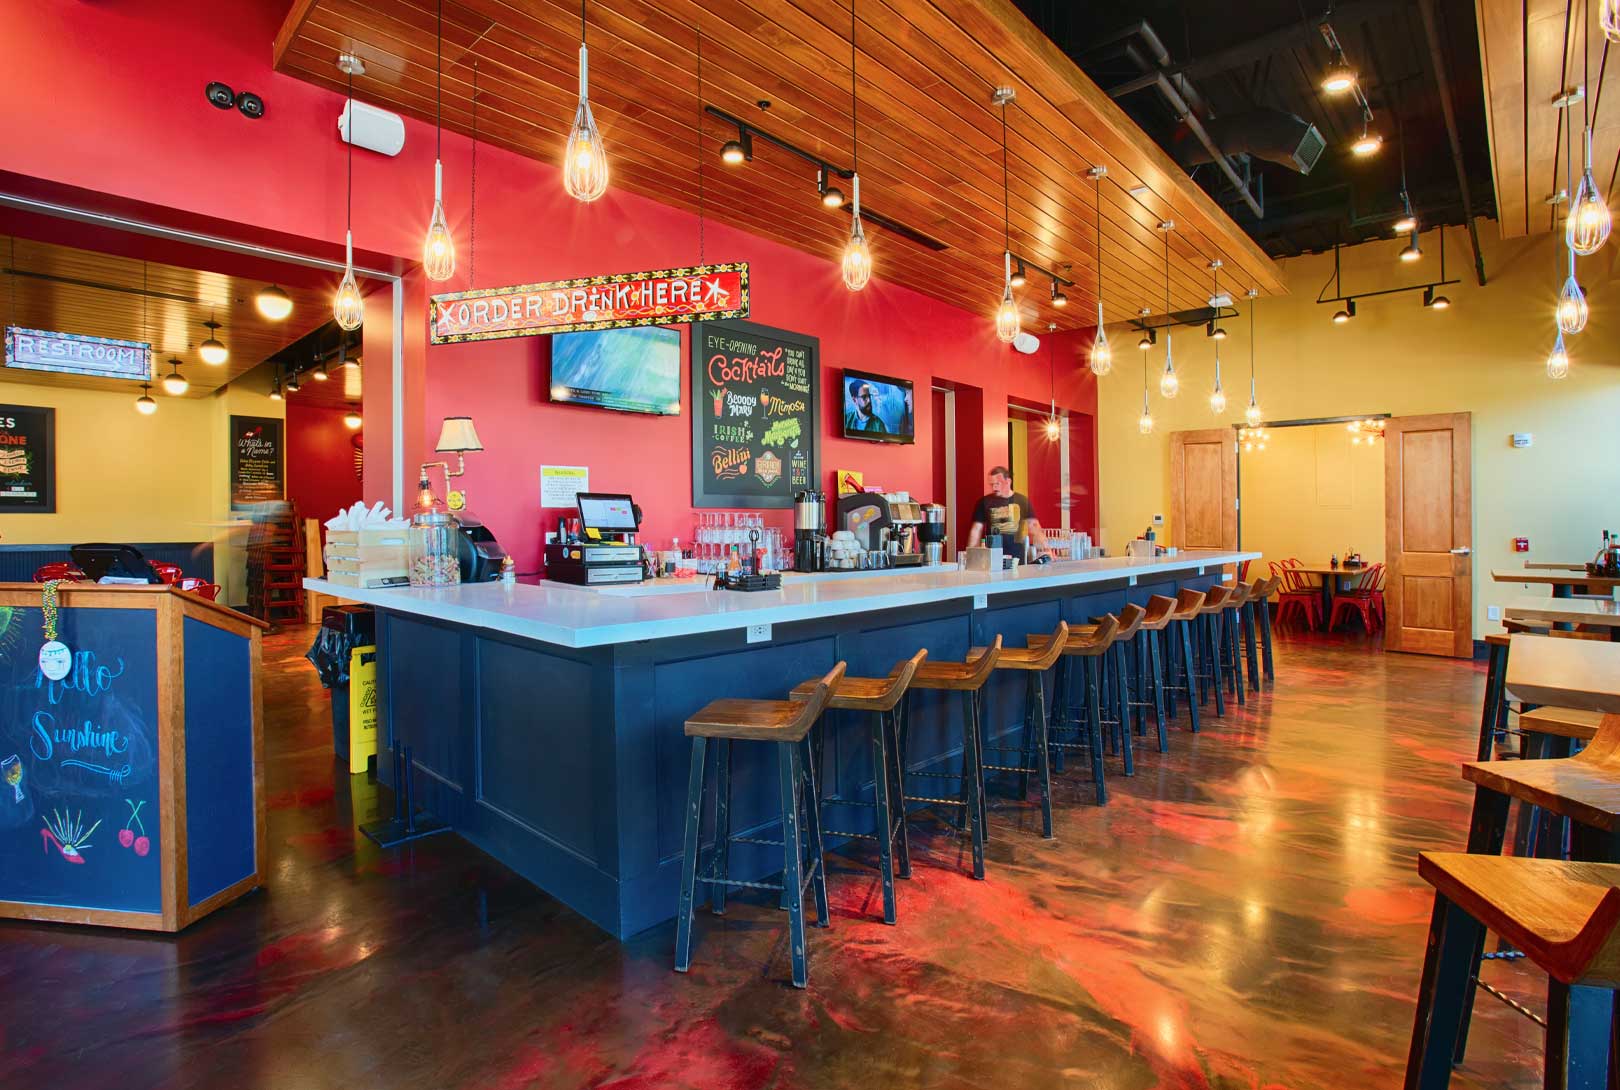 bar area of restaurant entrance with red and yellow walls, blue-gray wood bar and wooden stools